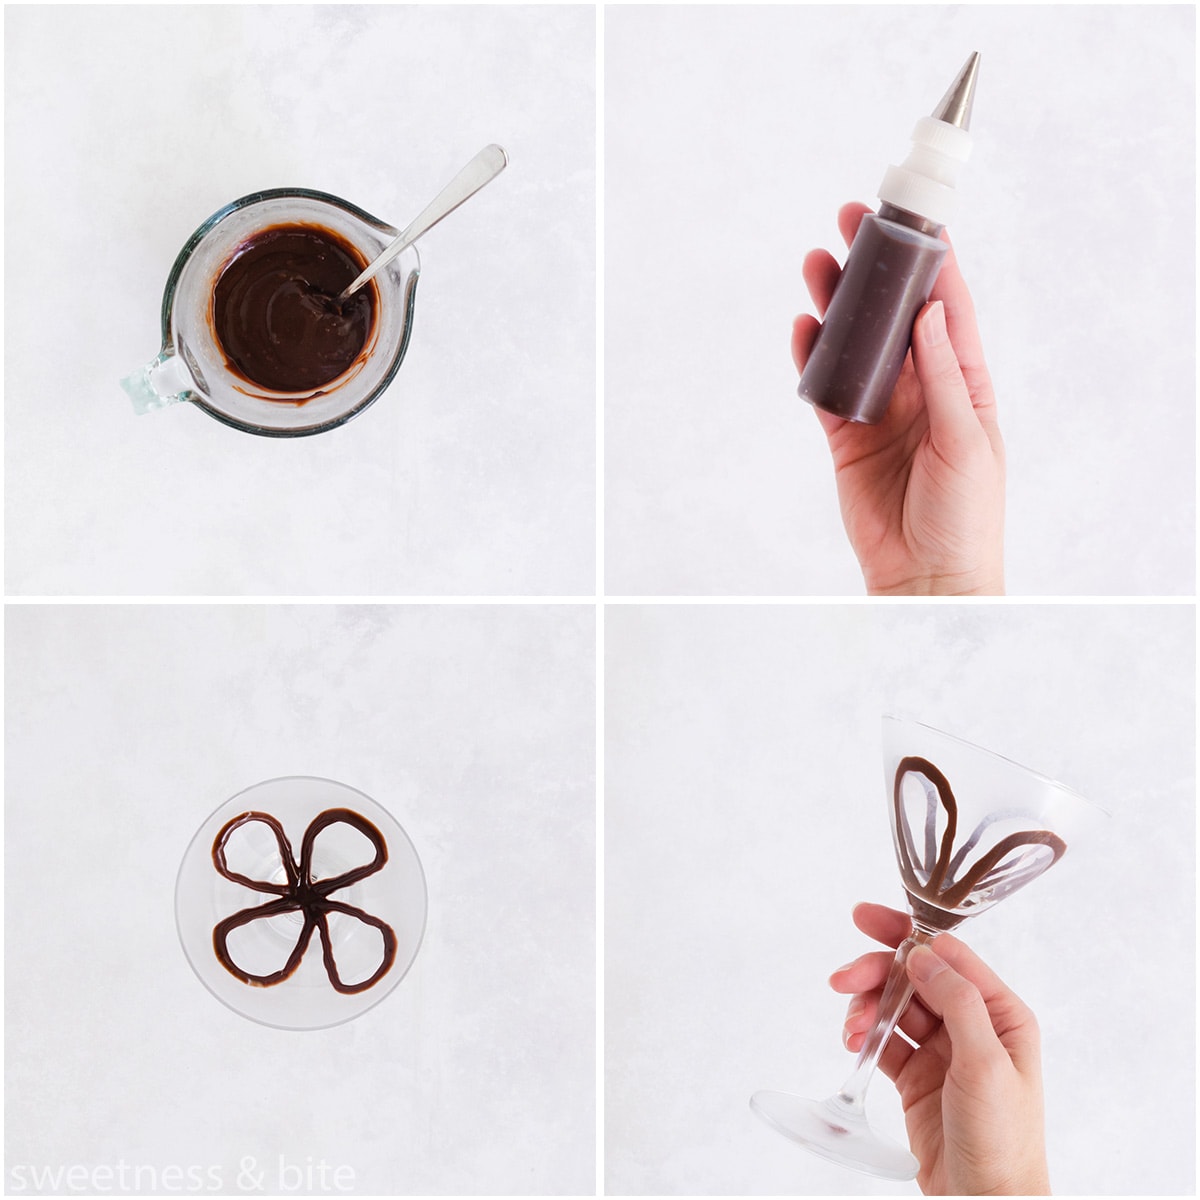 Collage of 4 images showing the ganache being piped into martini glasses with a squeeze bottle.